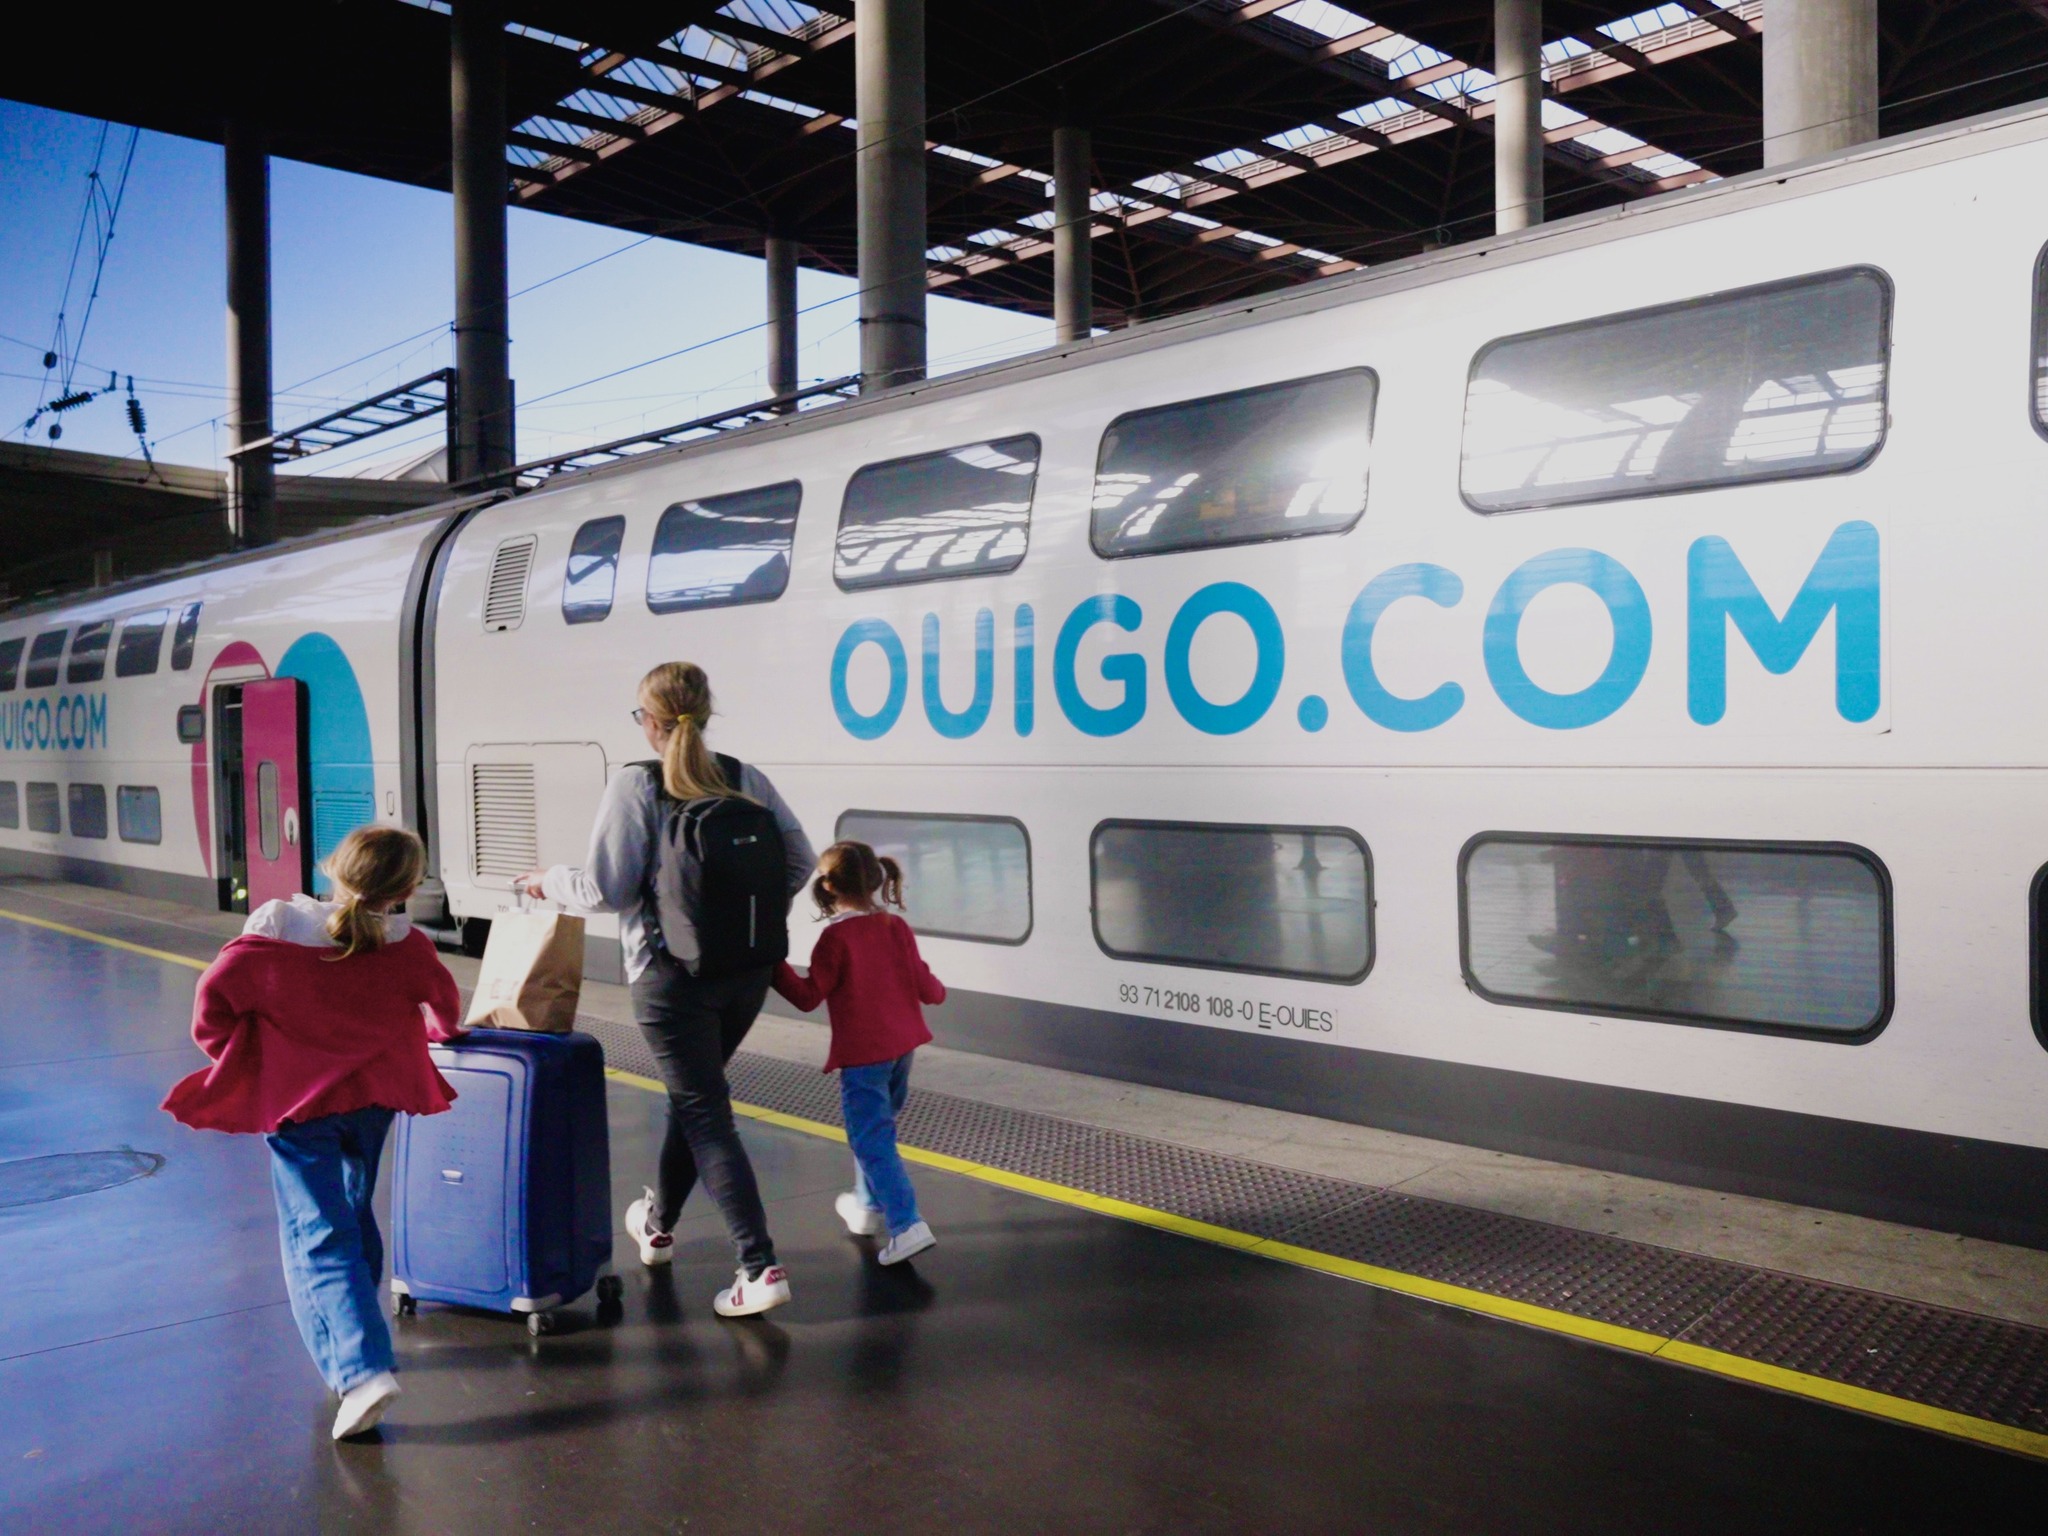 Extra low-cost fast train services to run between Spain's Costa Blanca and Madrid